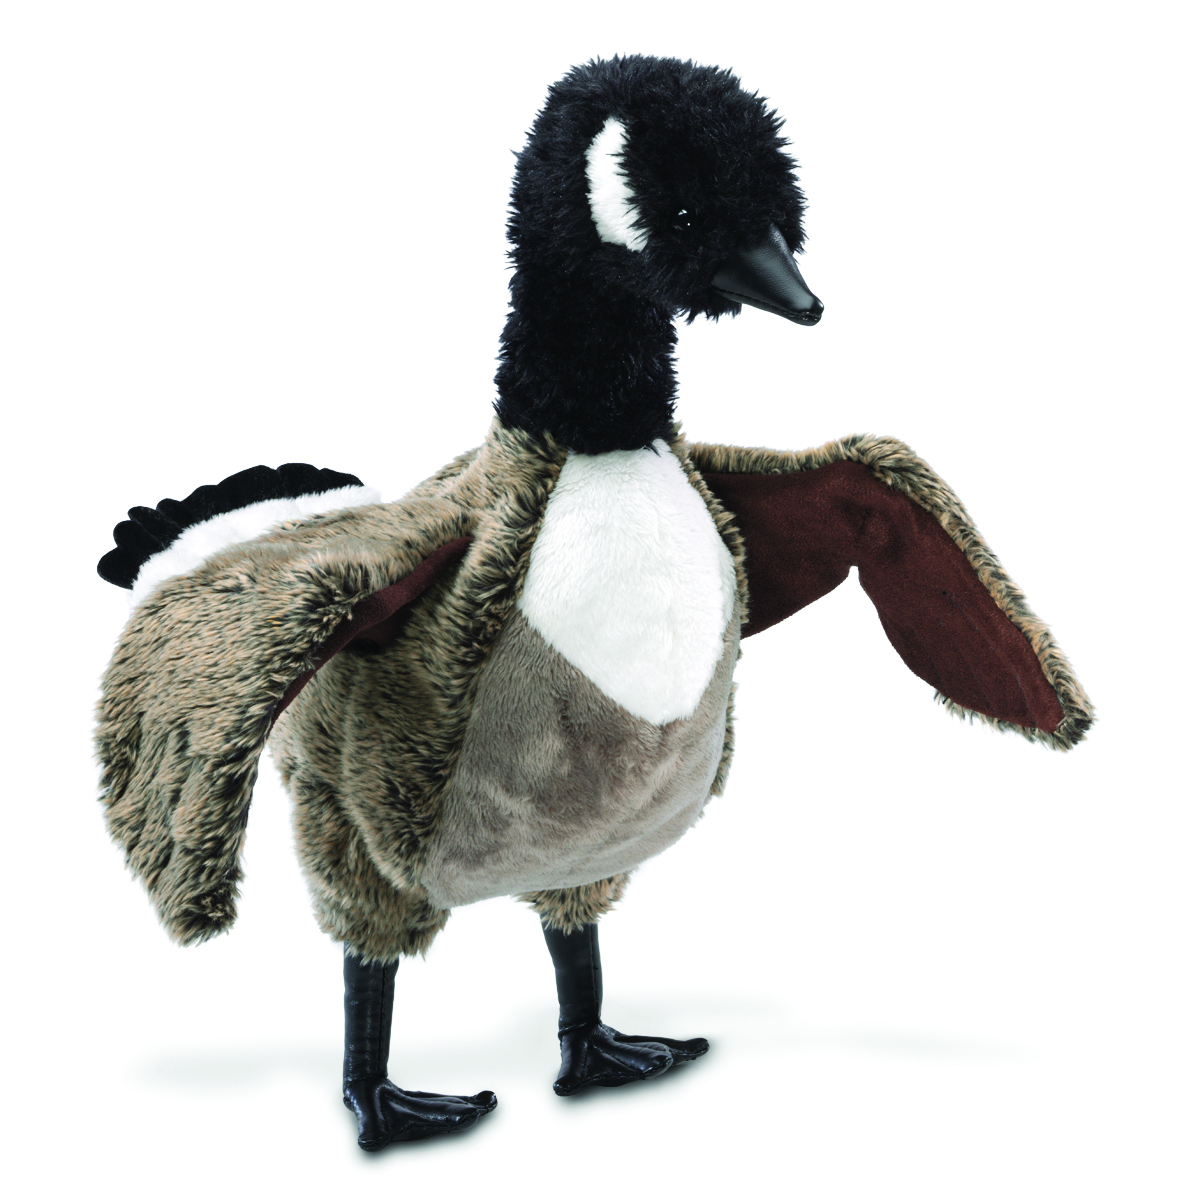 Folkmanis hand puppet Canada goose